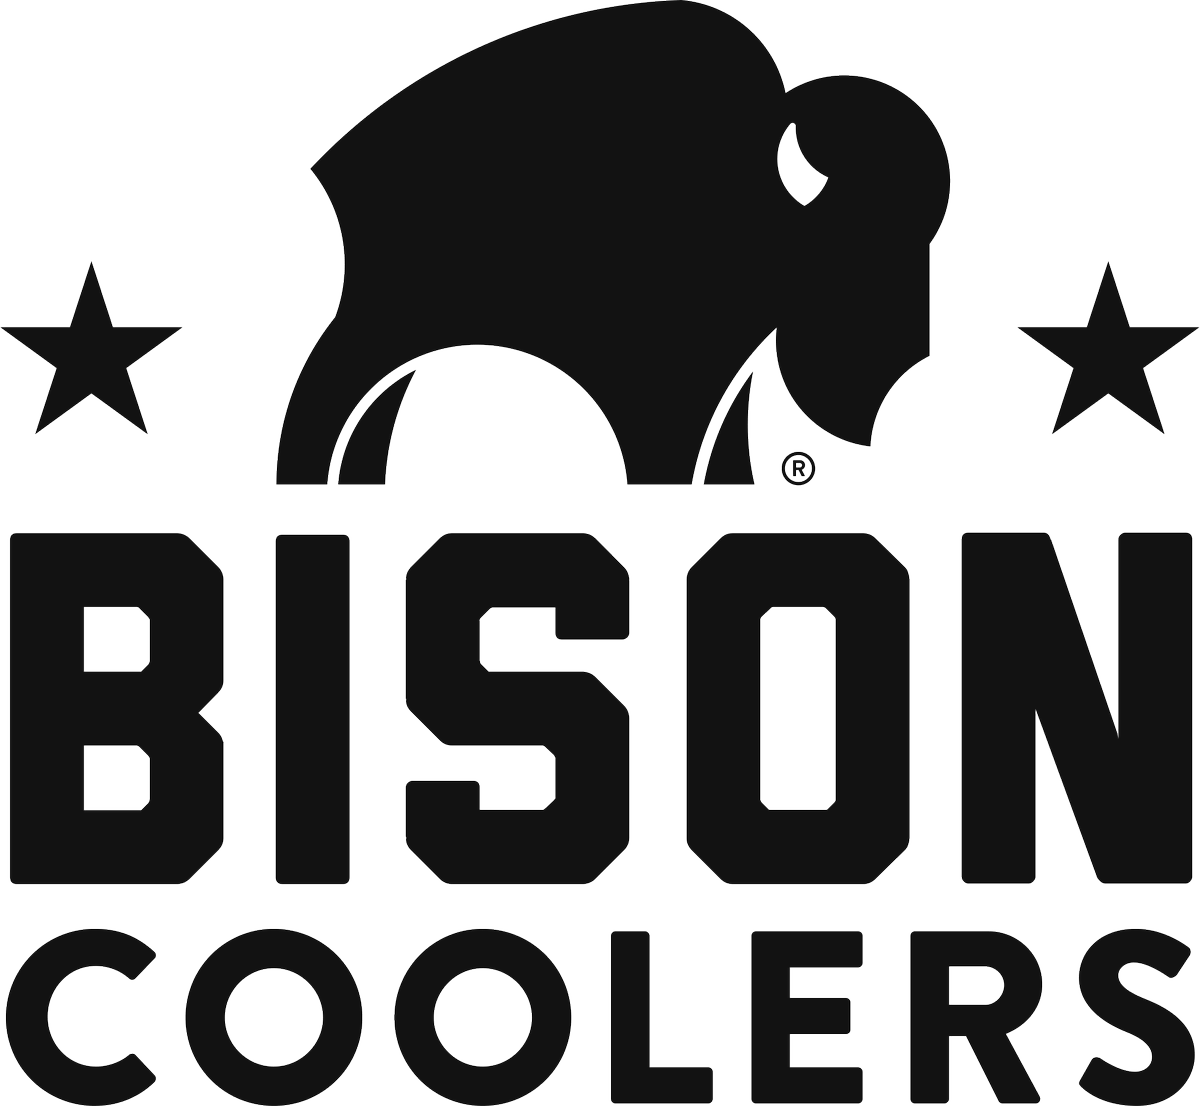 Bison Coolers Logo - Bison Coolers our American made